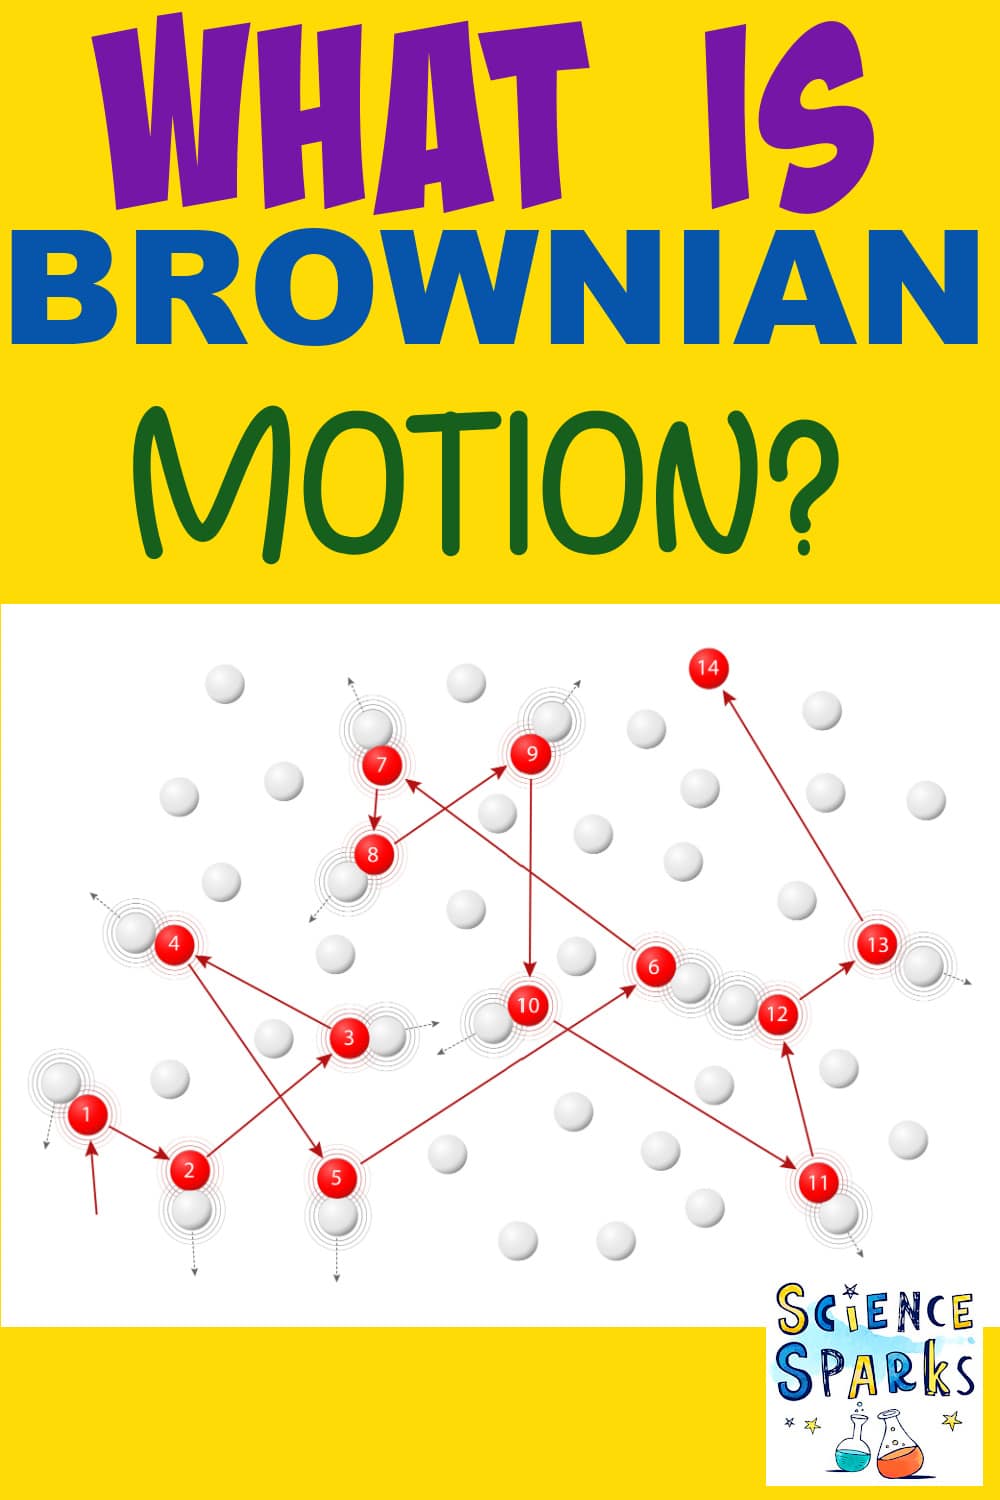 What is Brownian Motion?